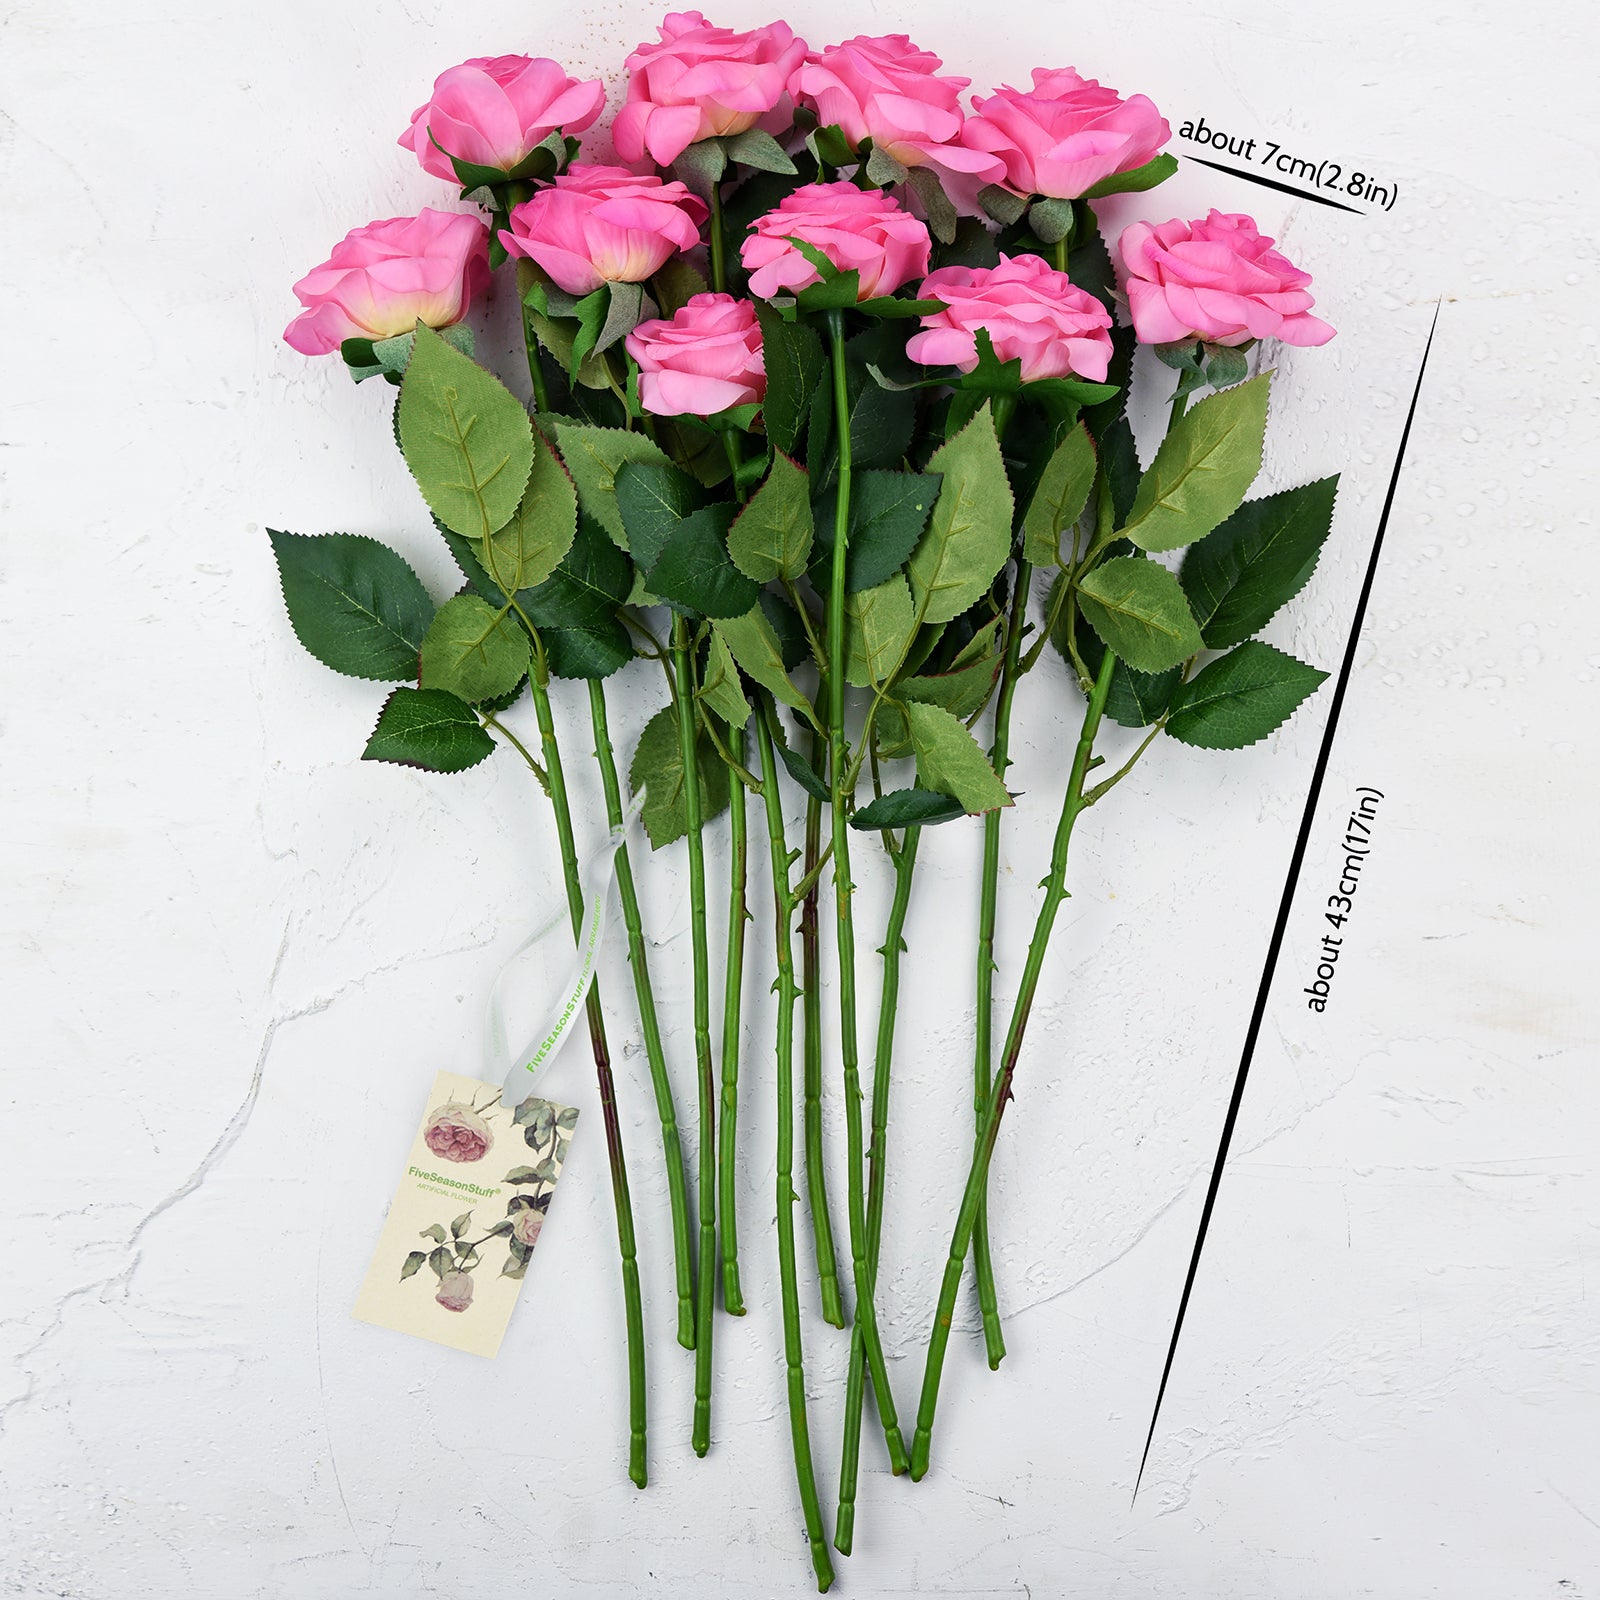 Magenta Real Touch Silk Artificial Flowers ‘Petals Feel and Look like Fresh Roses 10 Stems